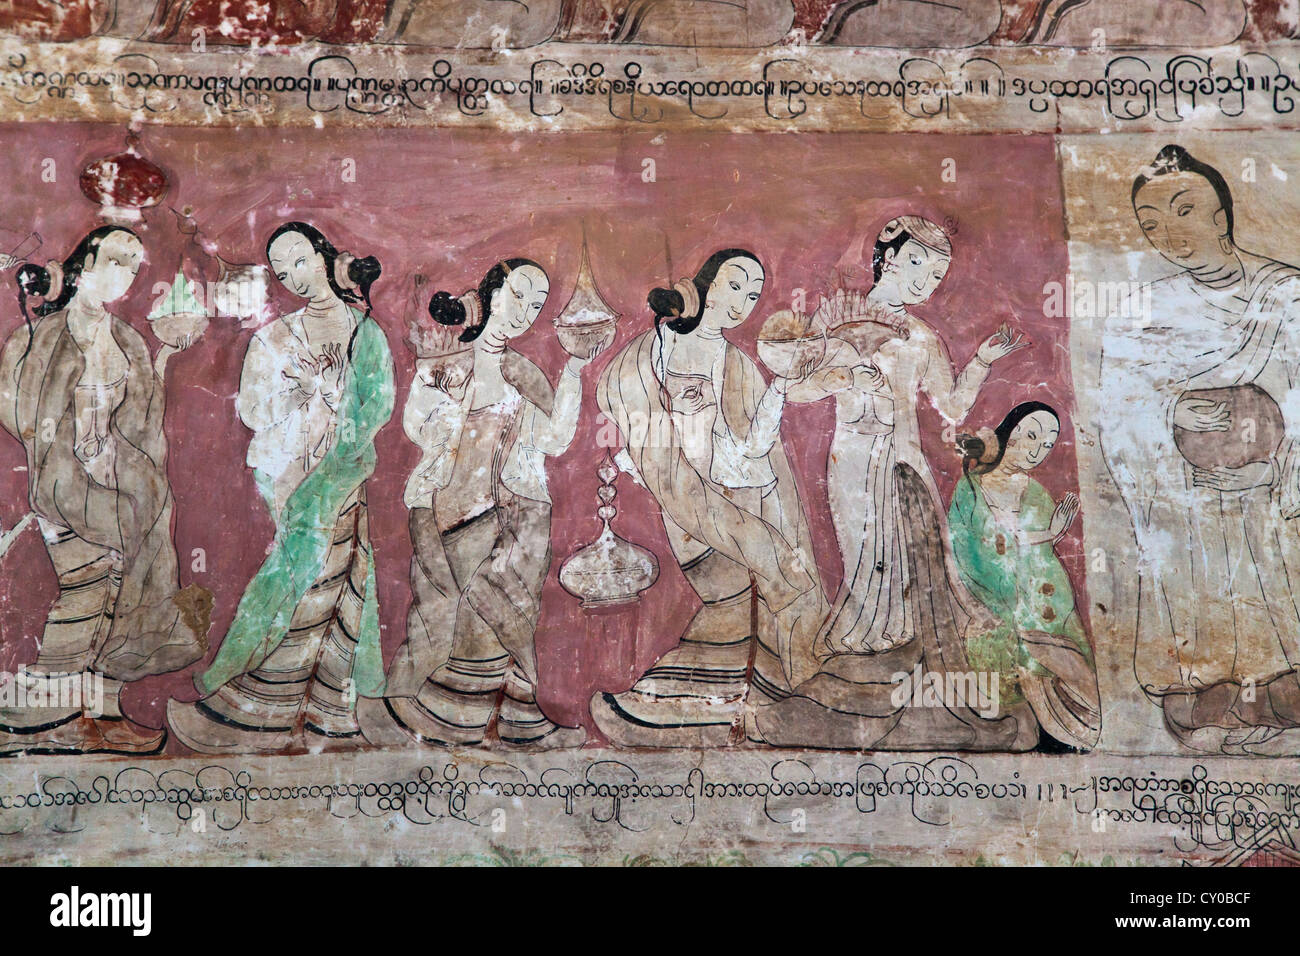 Original FRESCOS on the walls of SULAMANI PHATO which was completed by King Narapatisithu in 1211 AD - BAGAN, MYANMAR Stock Photo